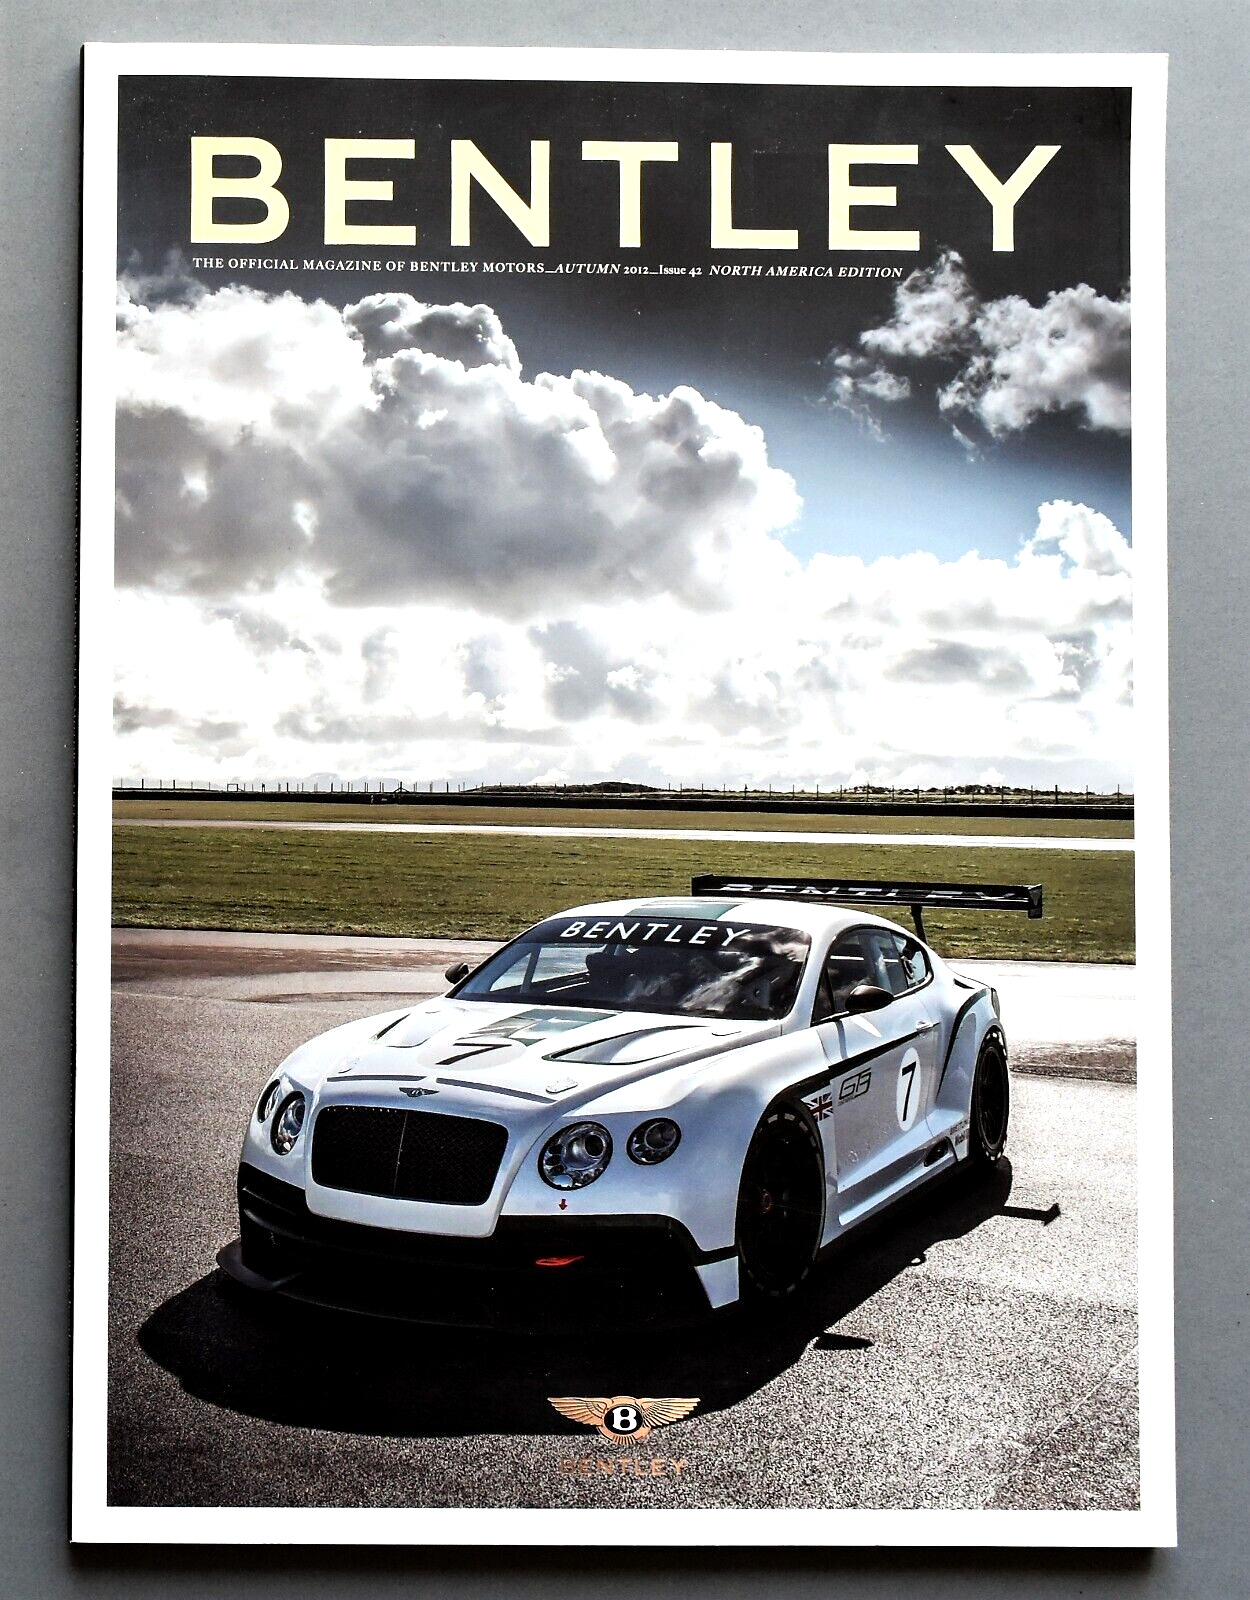 2012 BENTLEY MAGAZINE #42 ~ THE CONTINENTAL GT~LIVE THE AMAZING LIFE ~ 92 PAGES